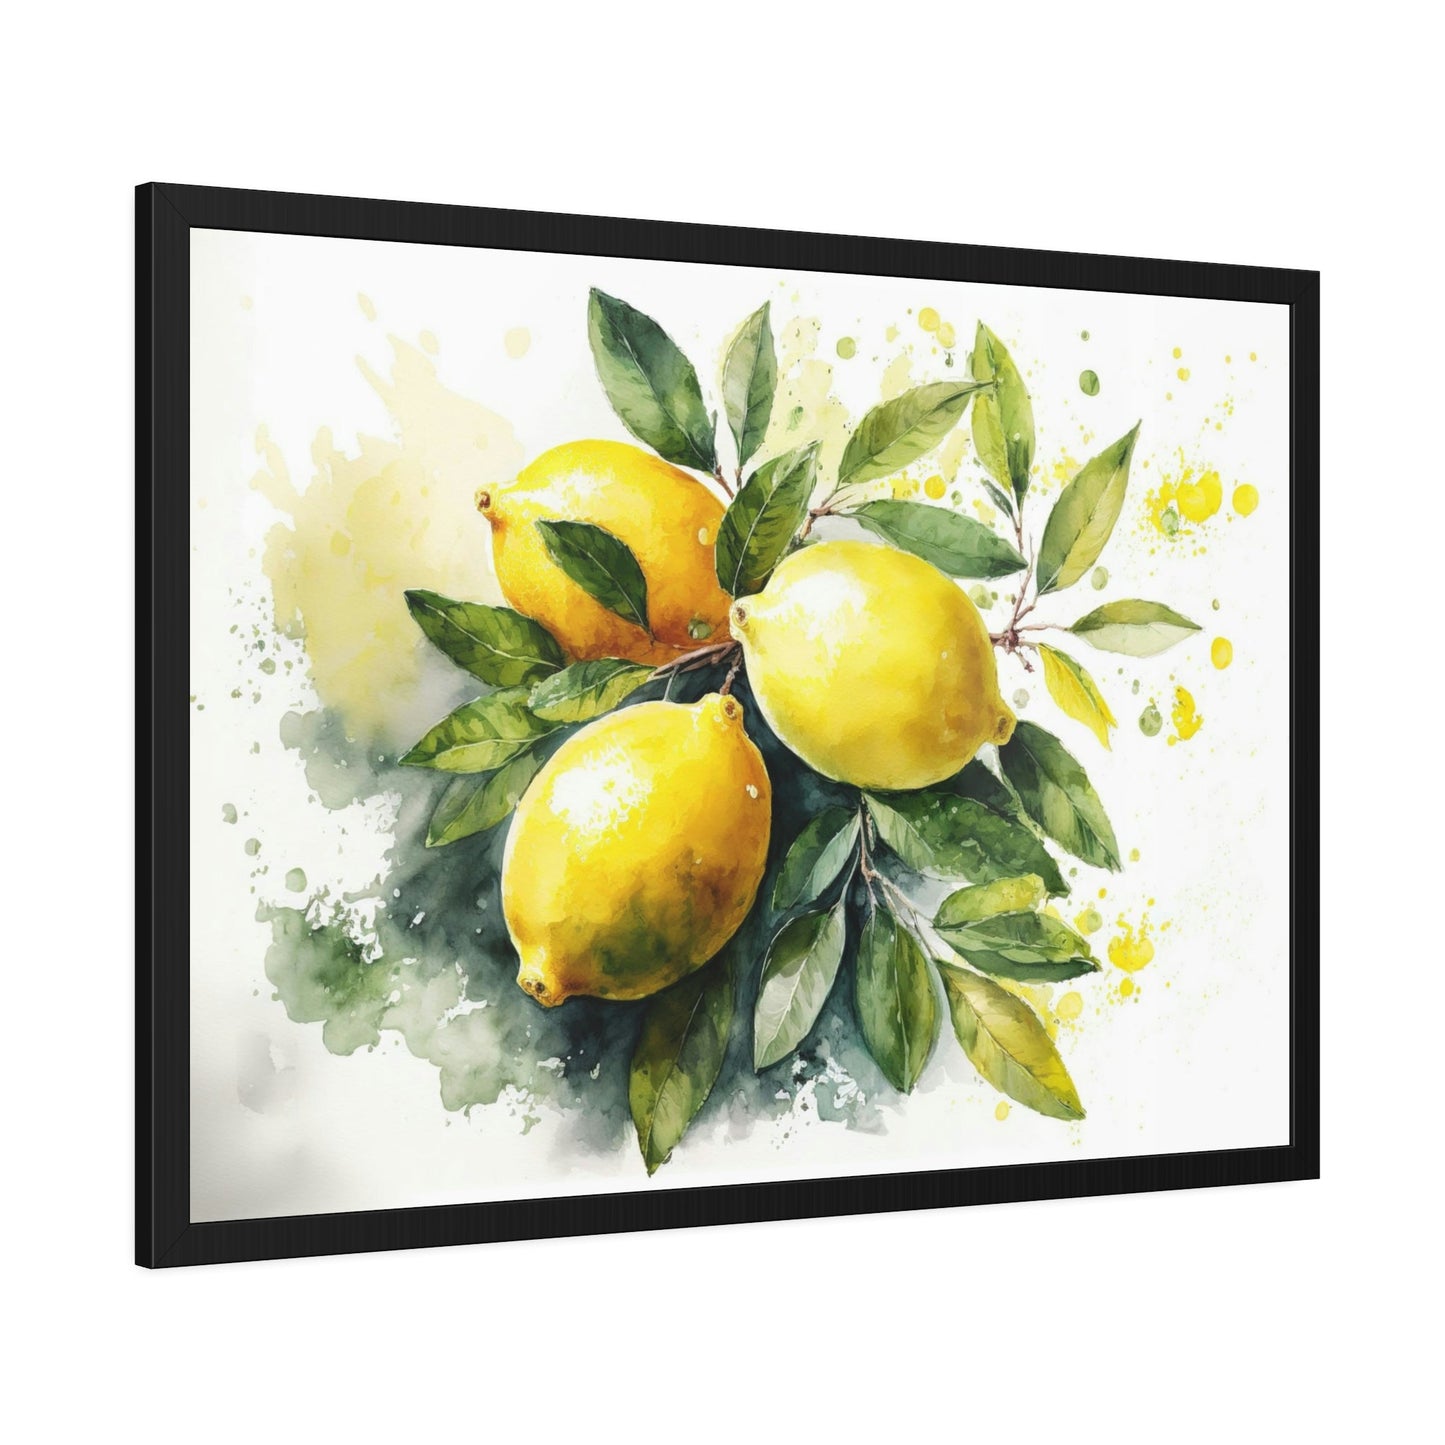 Tropical Citrus: Vibrant and Bold Wall Art Prints of Yellow Lemons on Natural Canvas & Posters